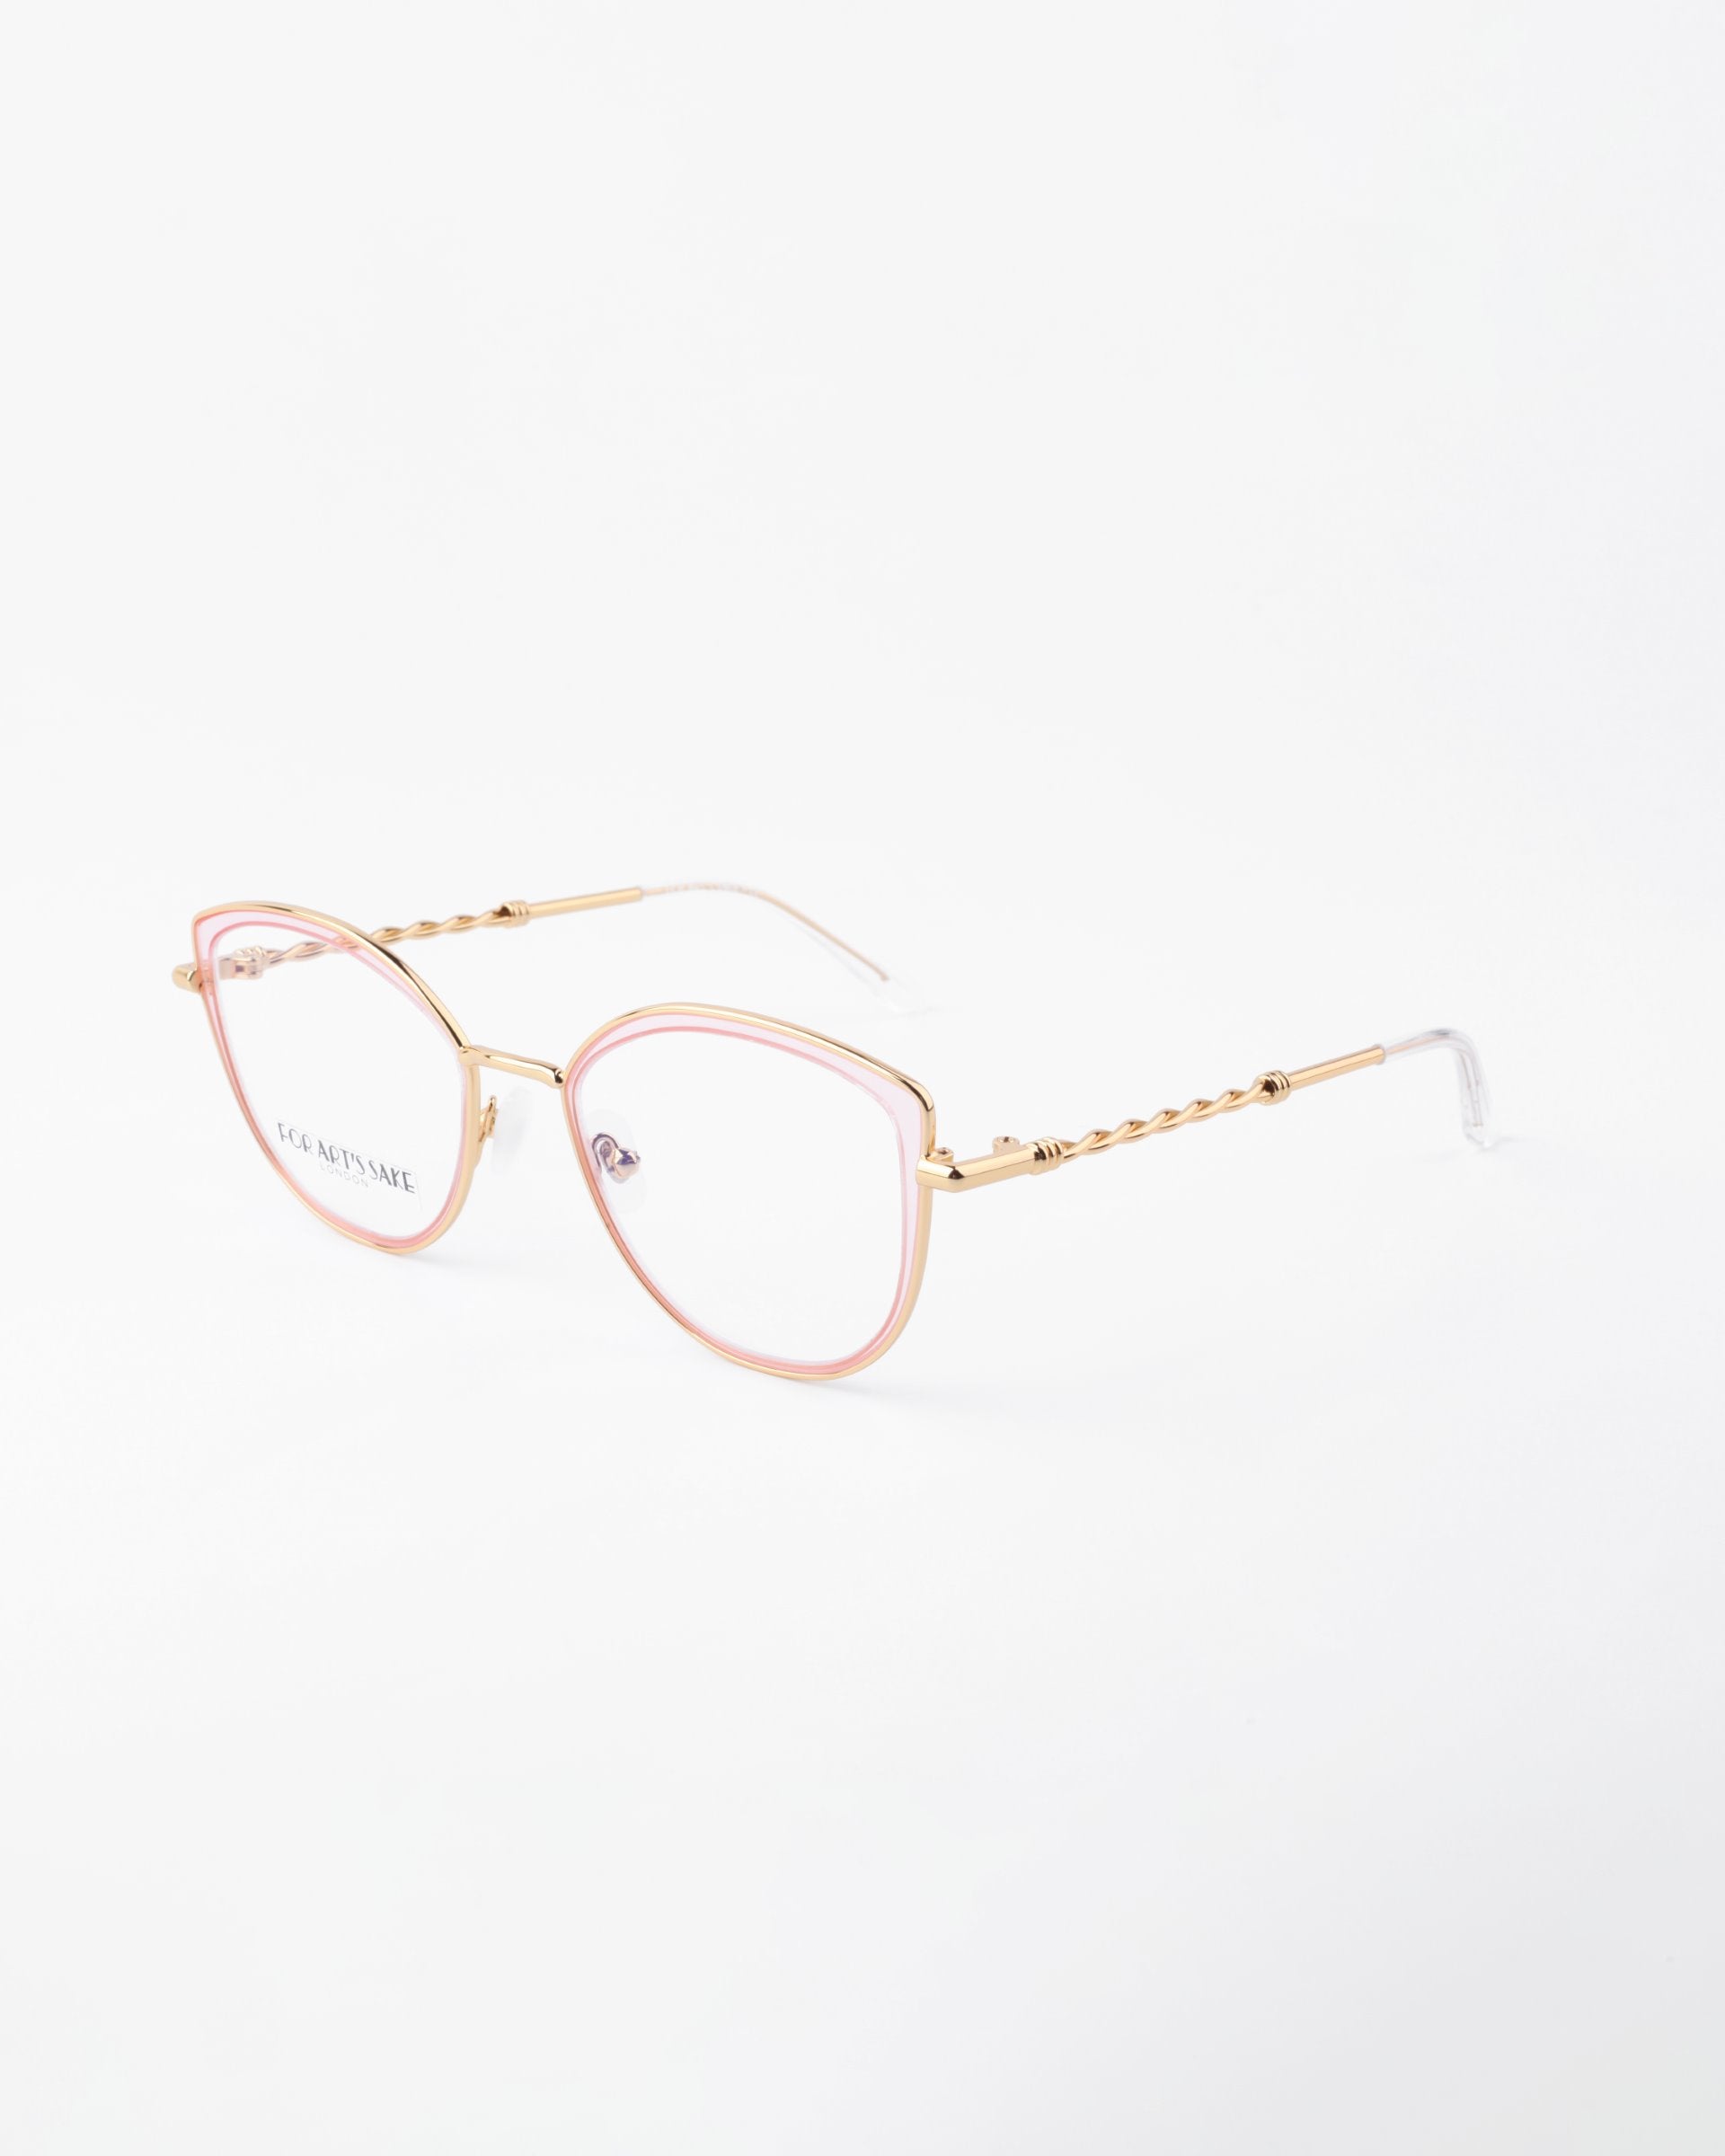 A pair of eyeglasses with gold-colored, thin, metal frames and pink accents around the lenses. The temples feature a decorative pattern and clear, adjustable nose pads. These 18-karat gold-plated glasses are displayed against a plain white background. They are the Julie by For Art&#39;s Sake®.